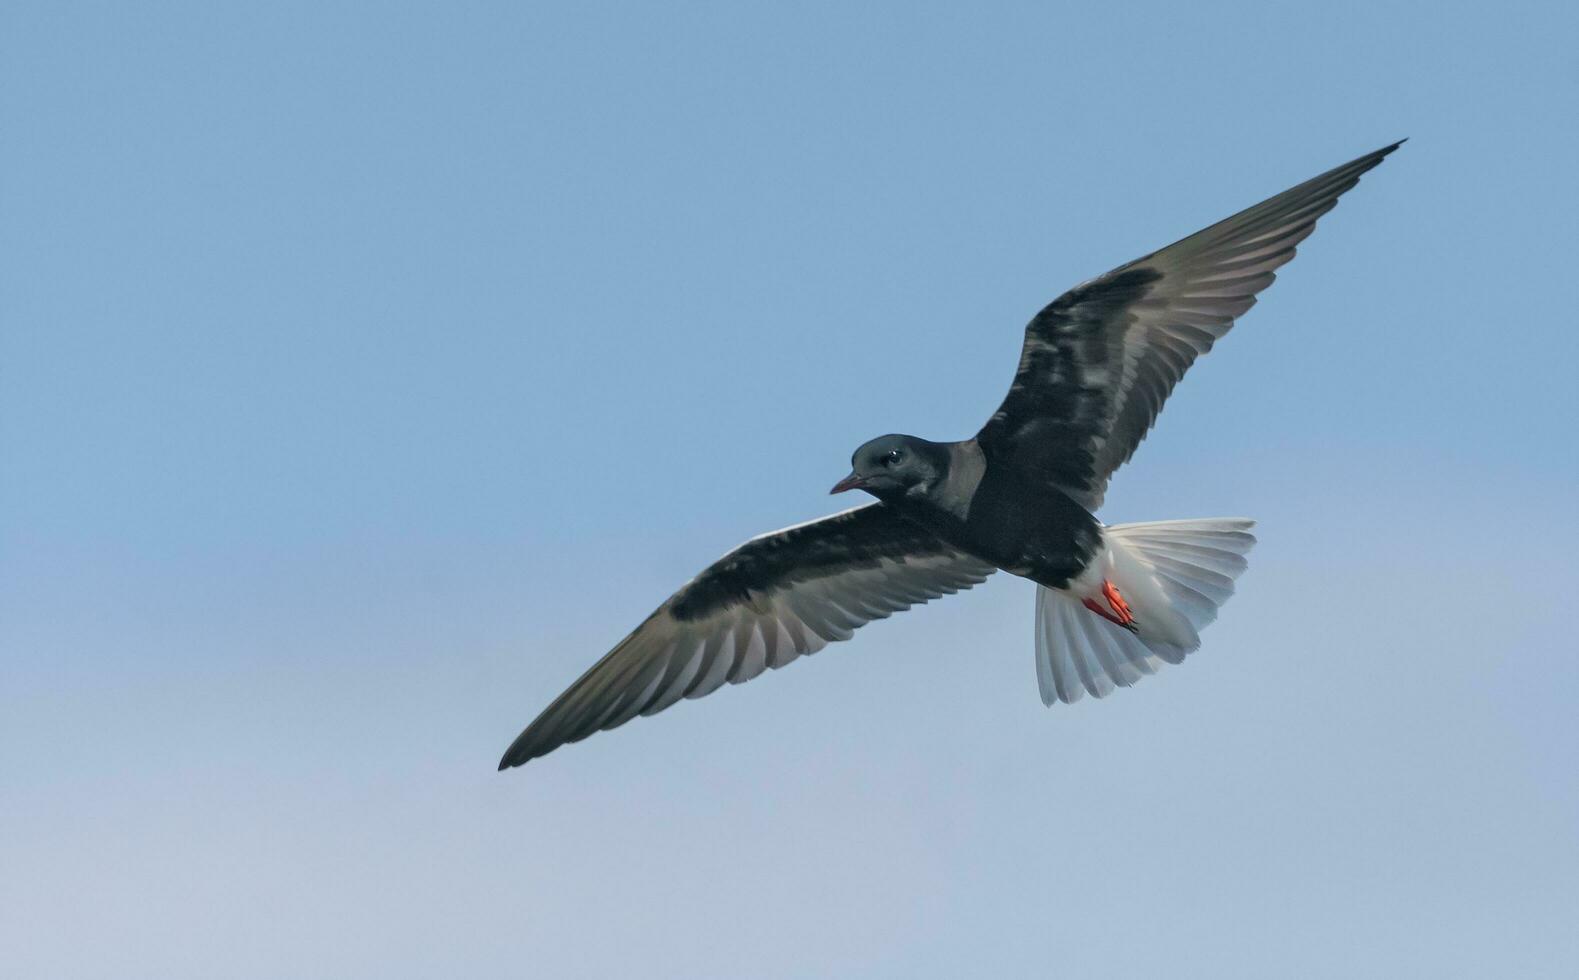 White-winged black tern - Chlidonias leucopterus - hover in blue sky in search of food with spreaded wings photo